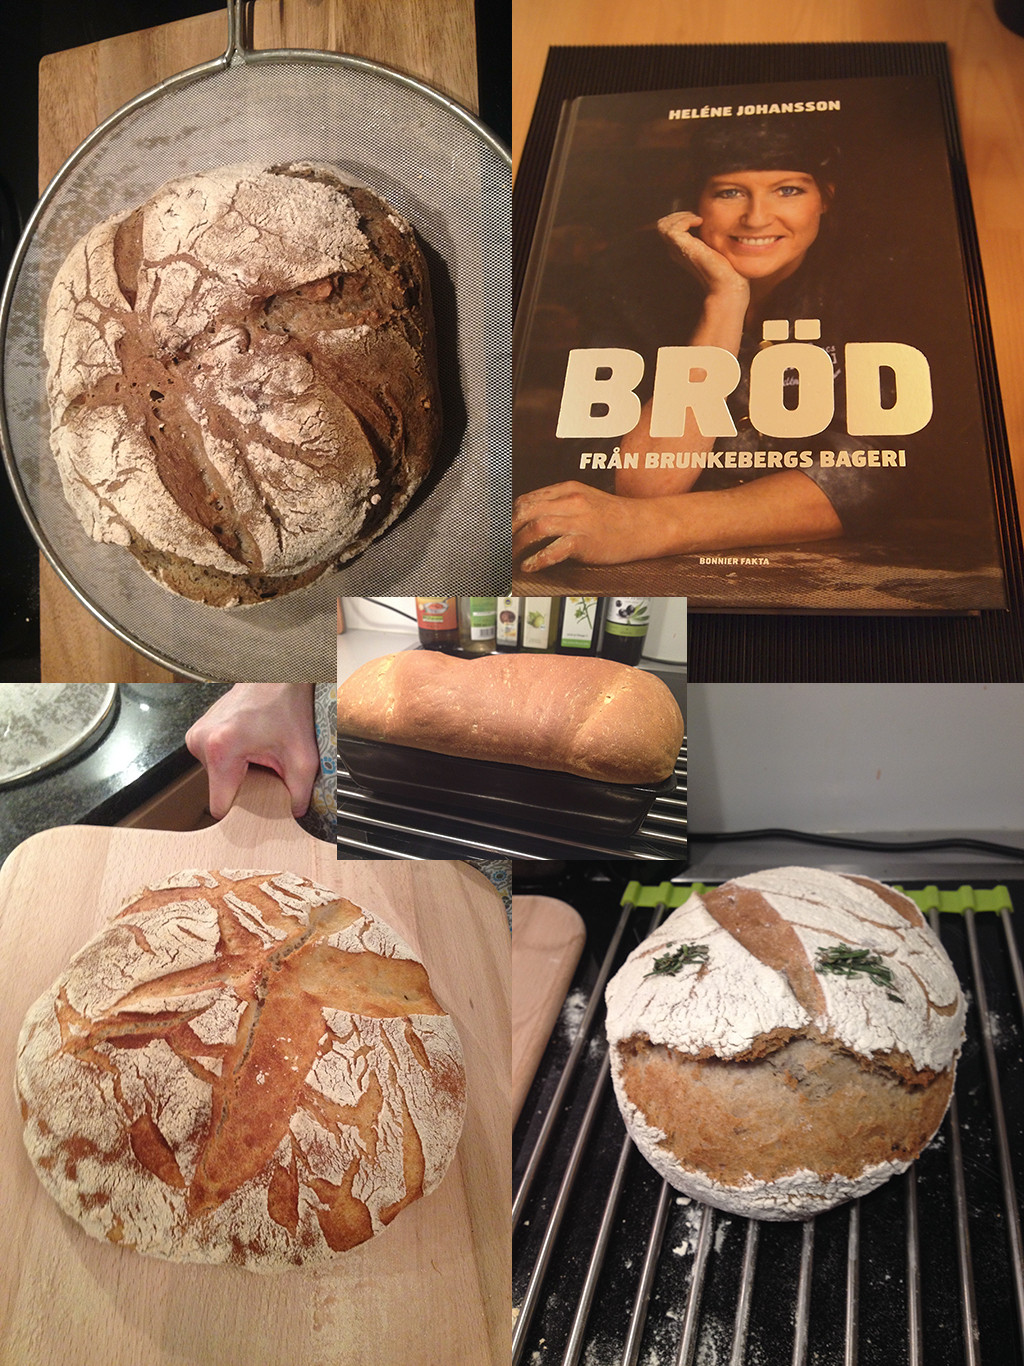 Thanks to Björn and Helene Johansson (not related) fabulously fluffy (inside) and crispy (outside) bread creations succeed!